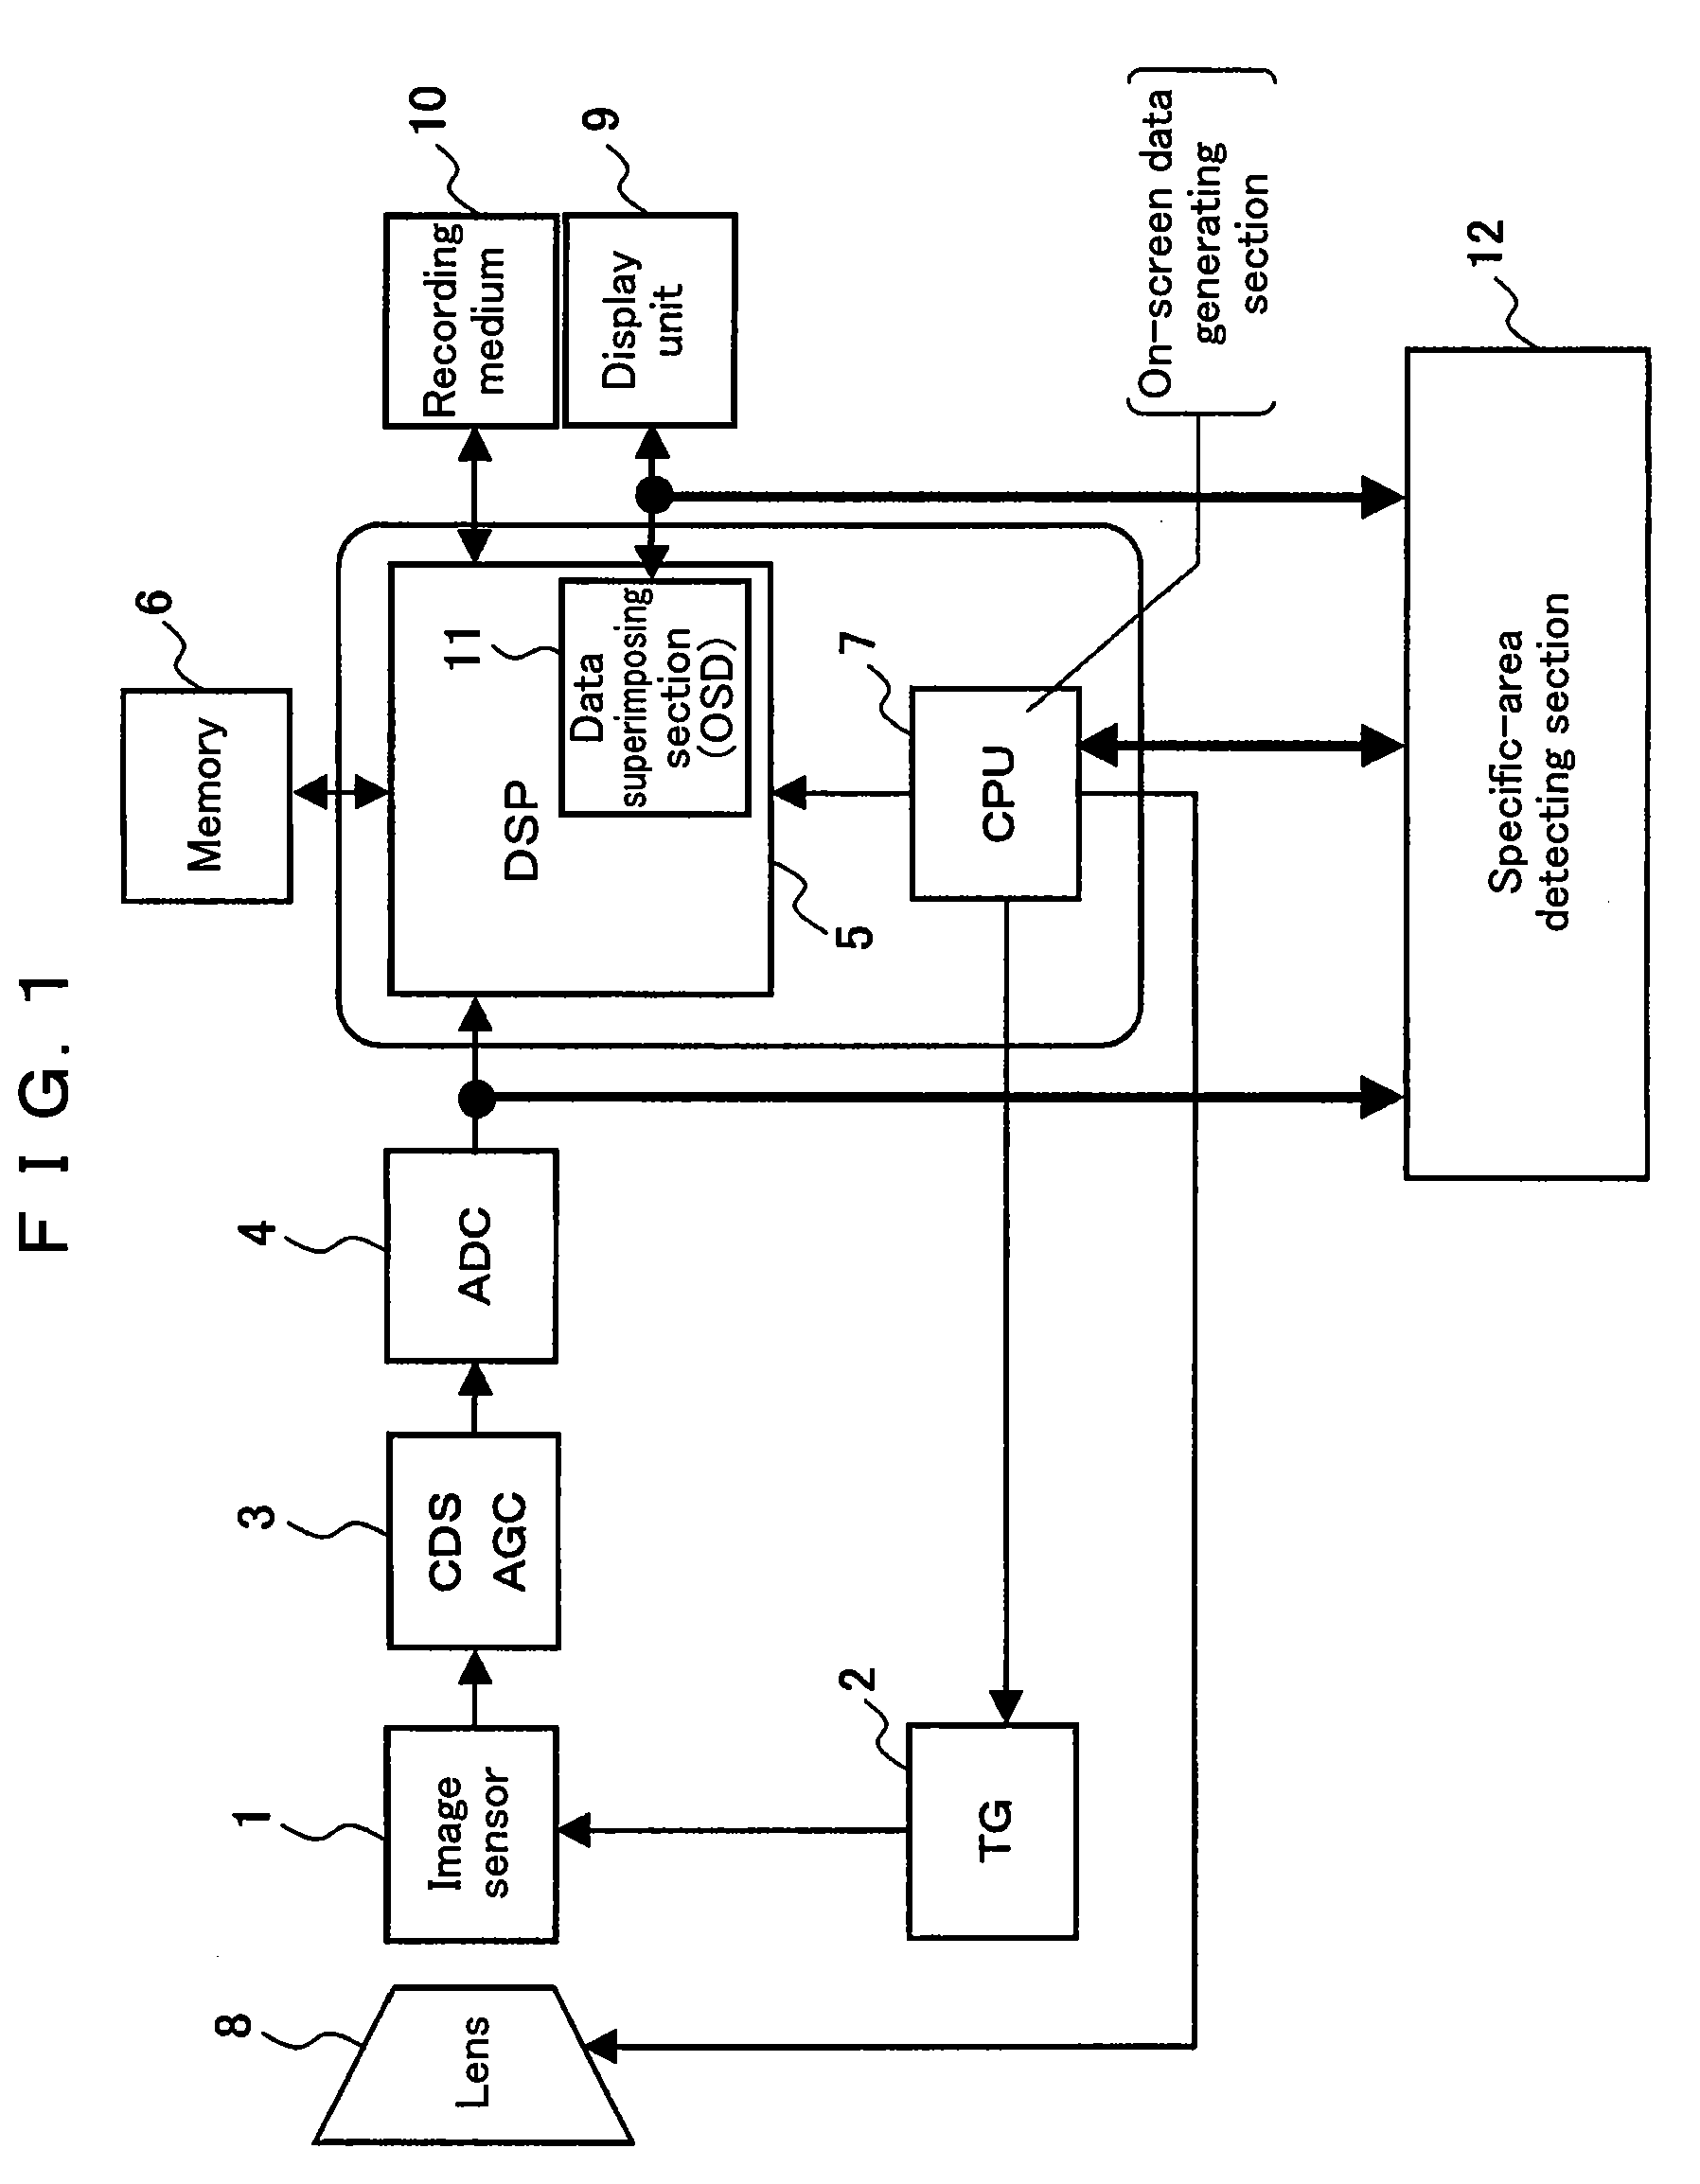 Image processor and imaging device